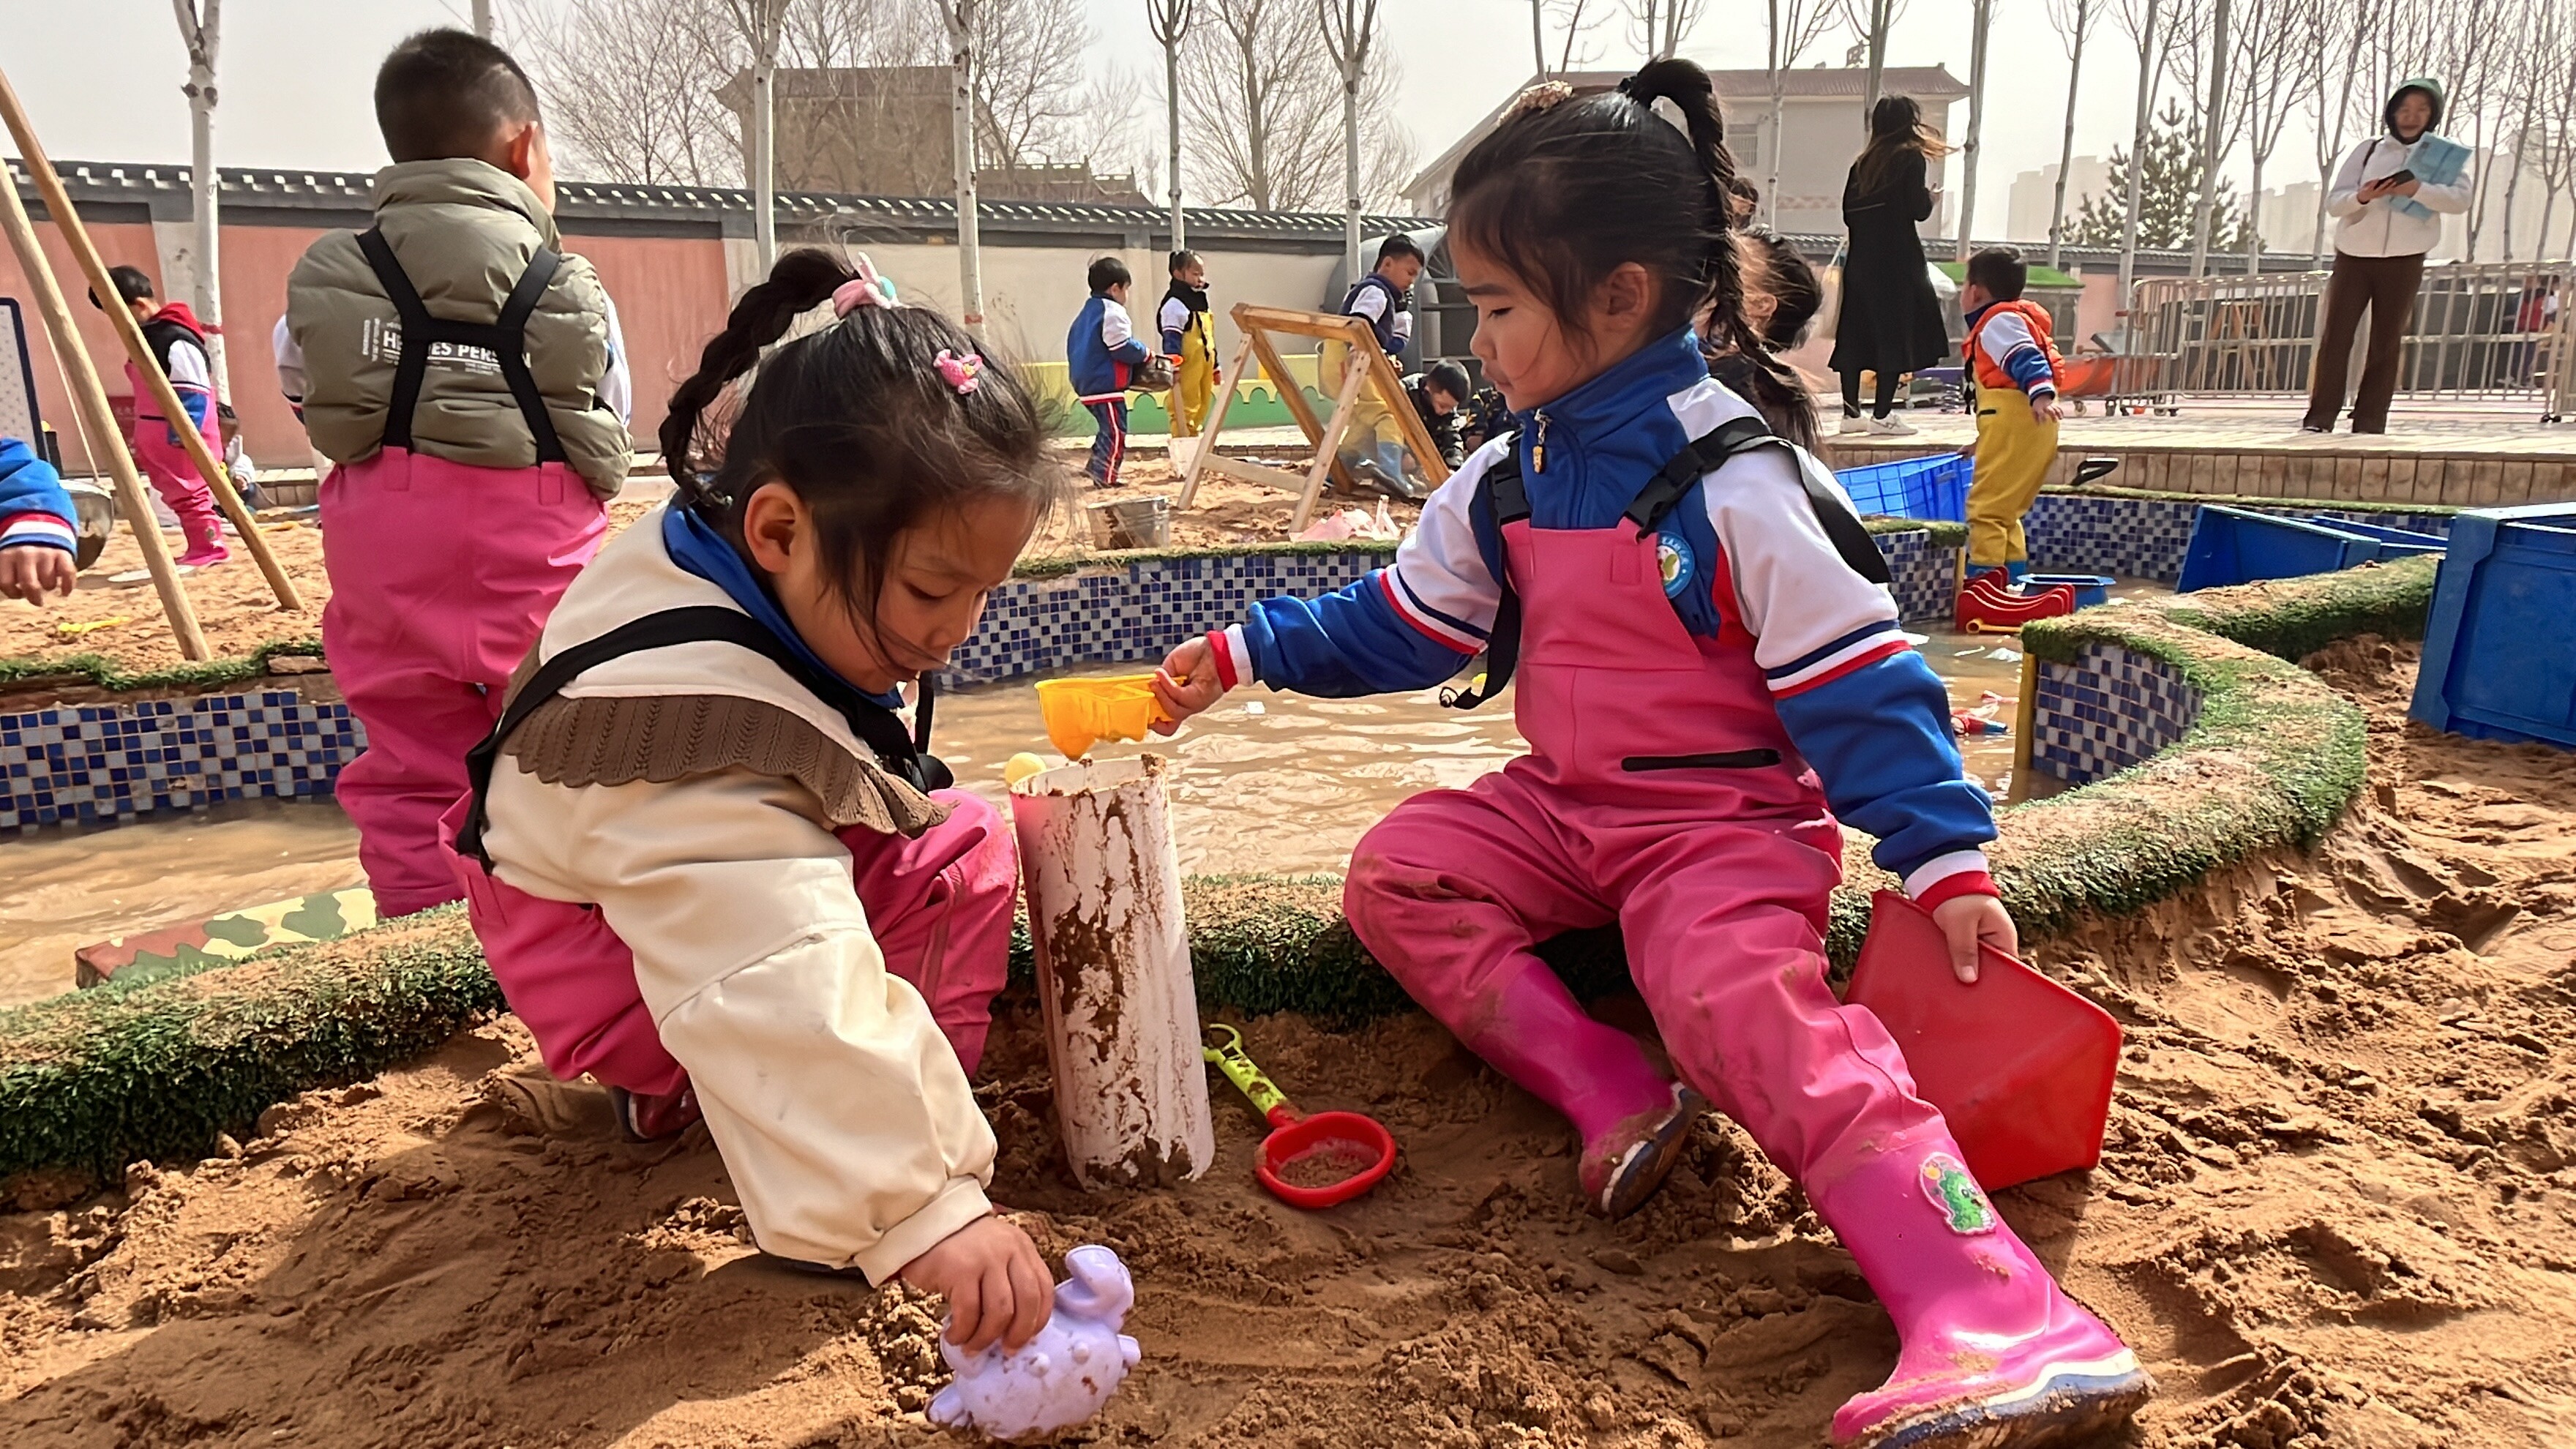 Launch of the “Anji Play” Localization Exploration Program for rural kindergartens in Shaanxi Province